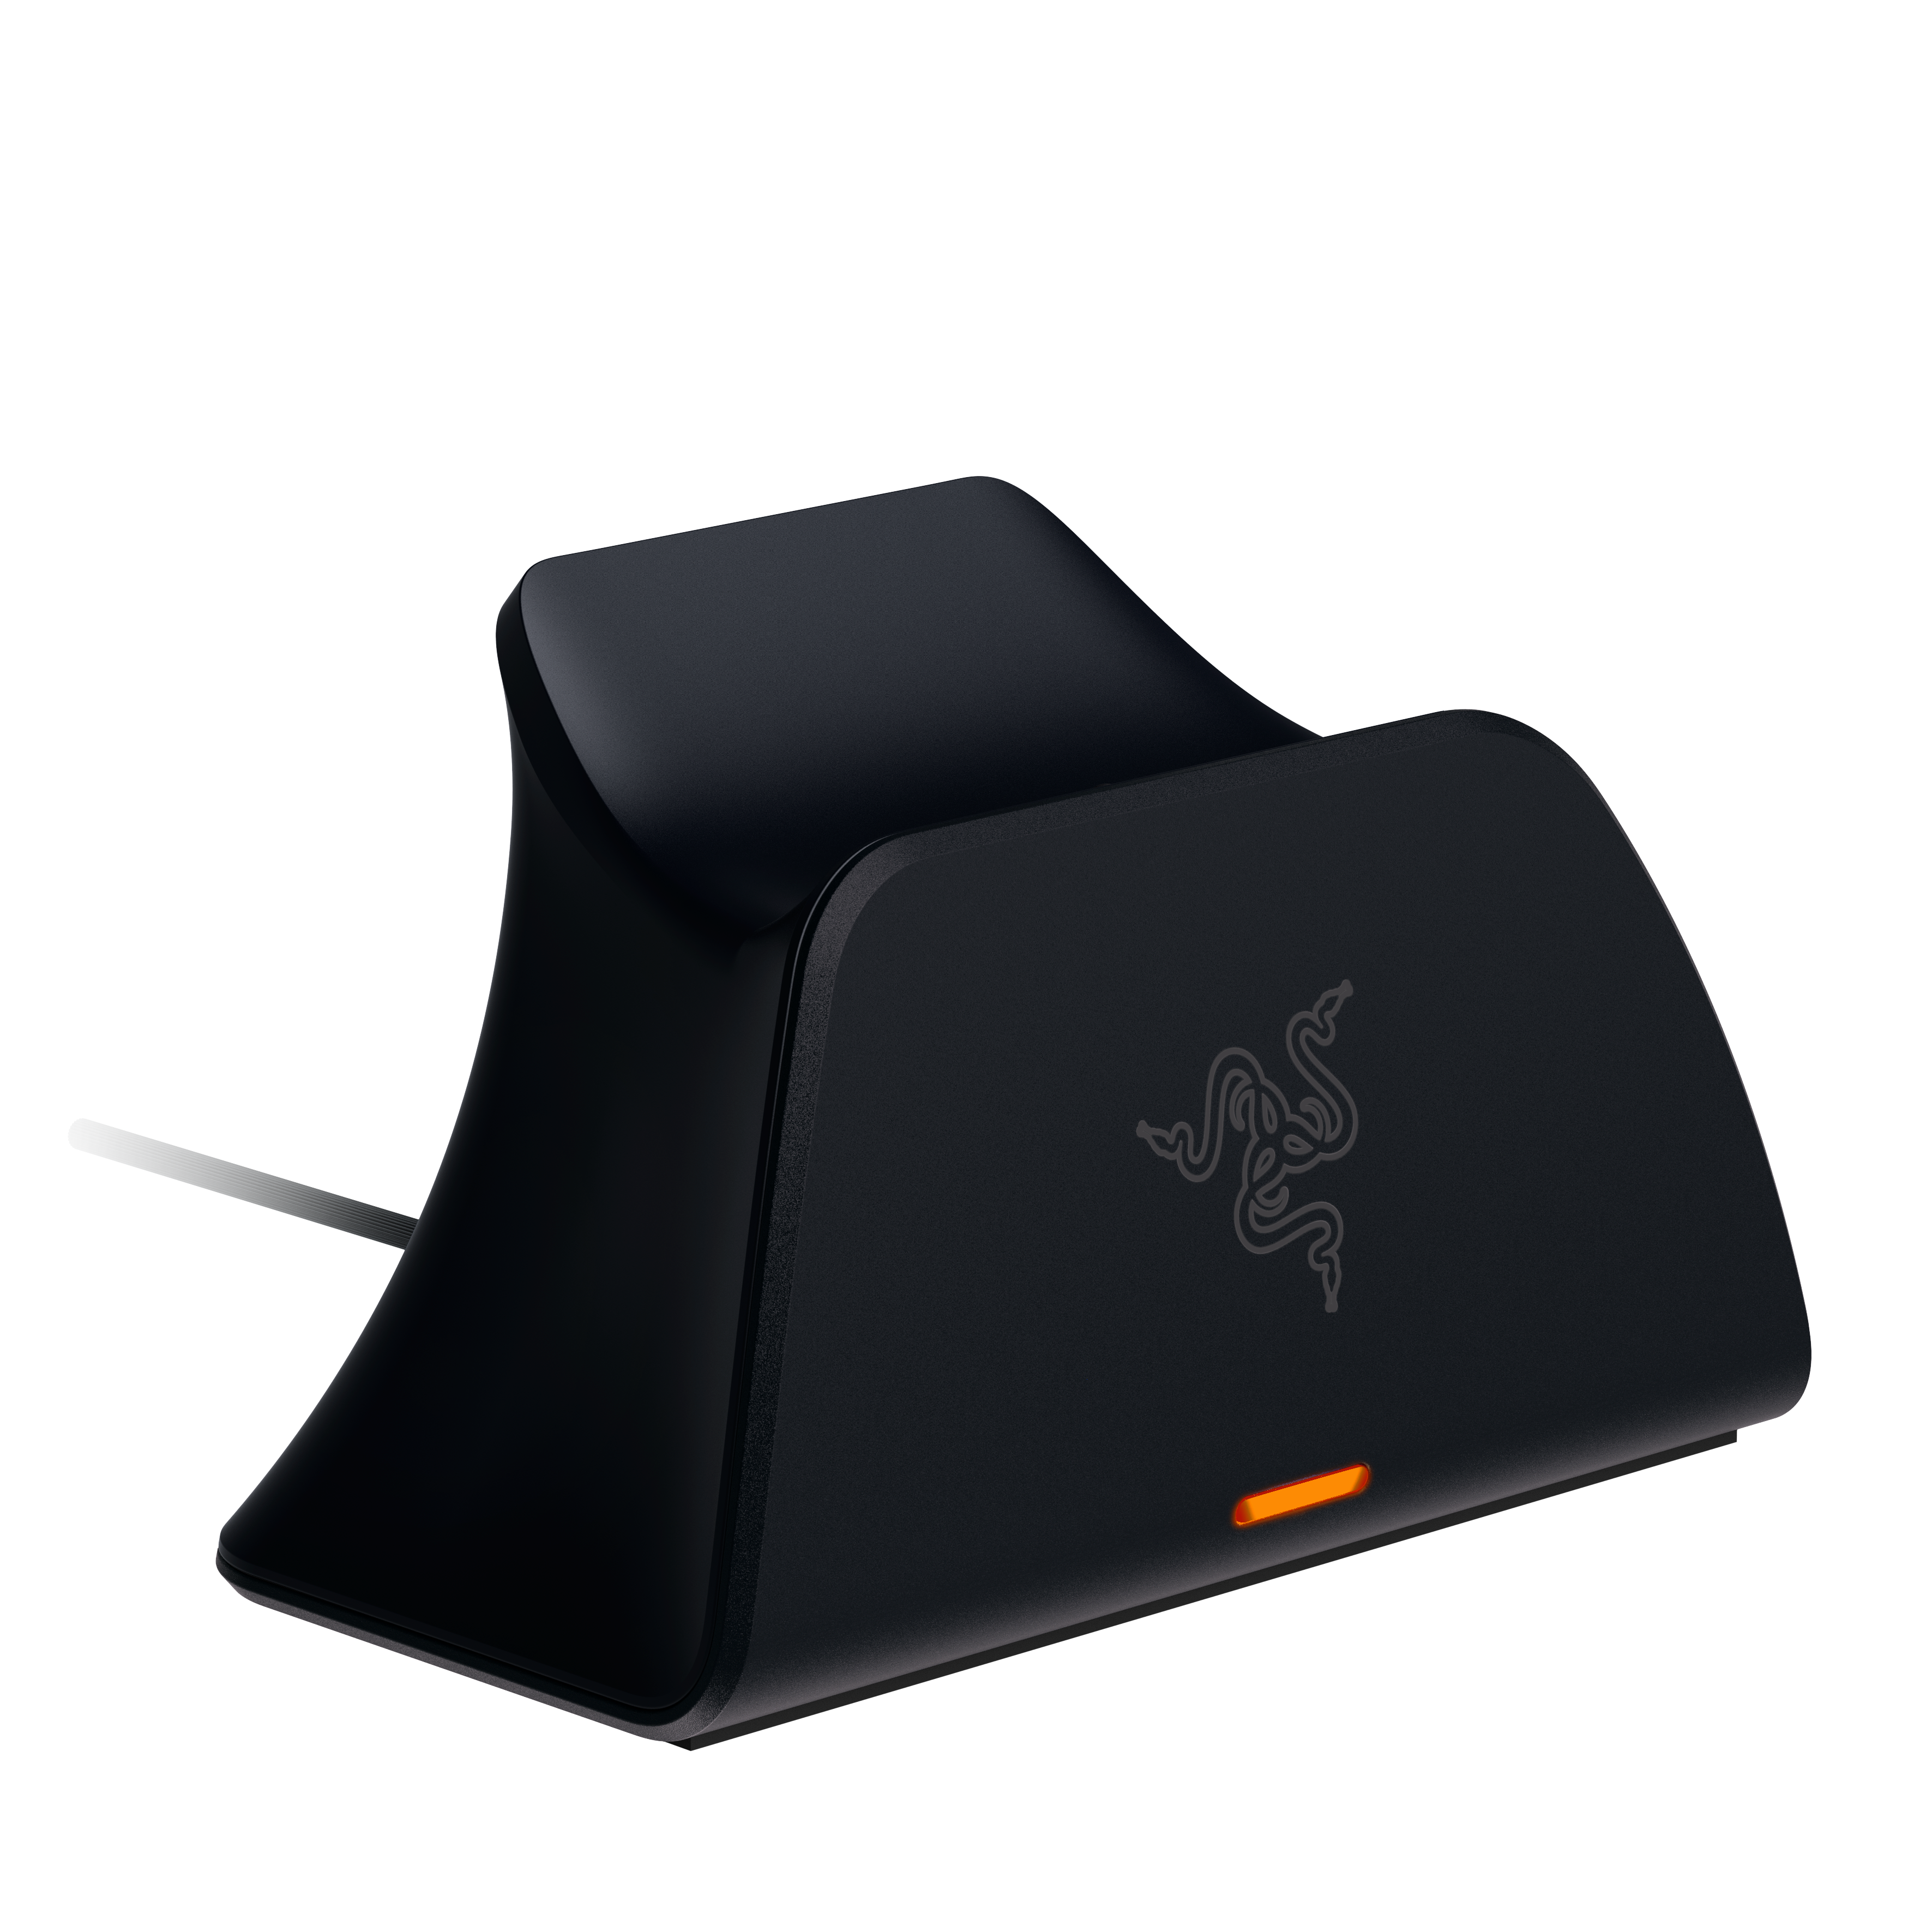 list item 2 of 6 Razer Quick Charging Stand for PlayStation 5 DualSense Wireless Controller Black